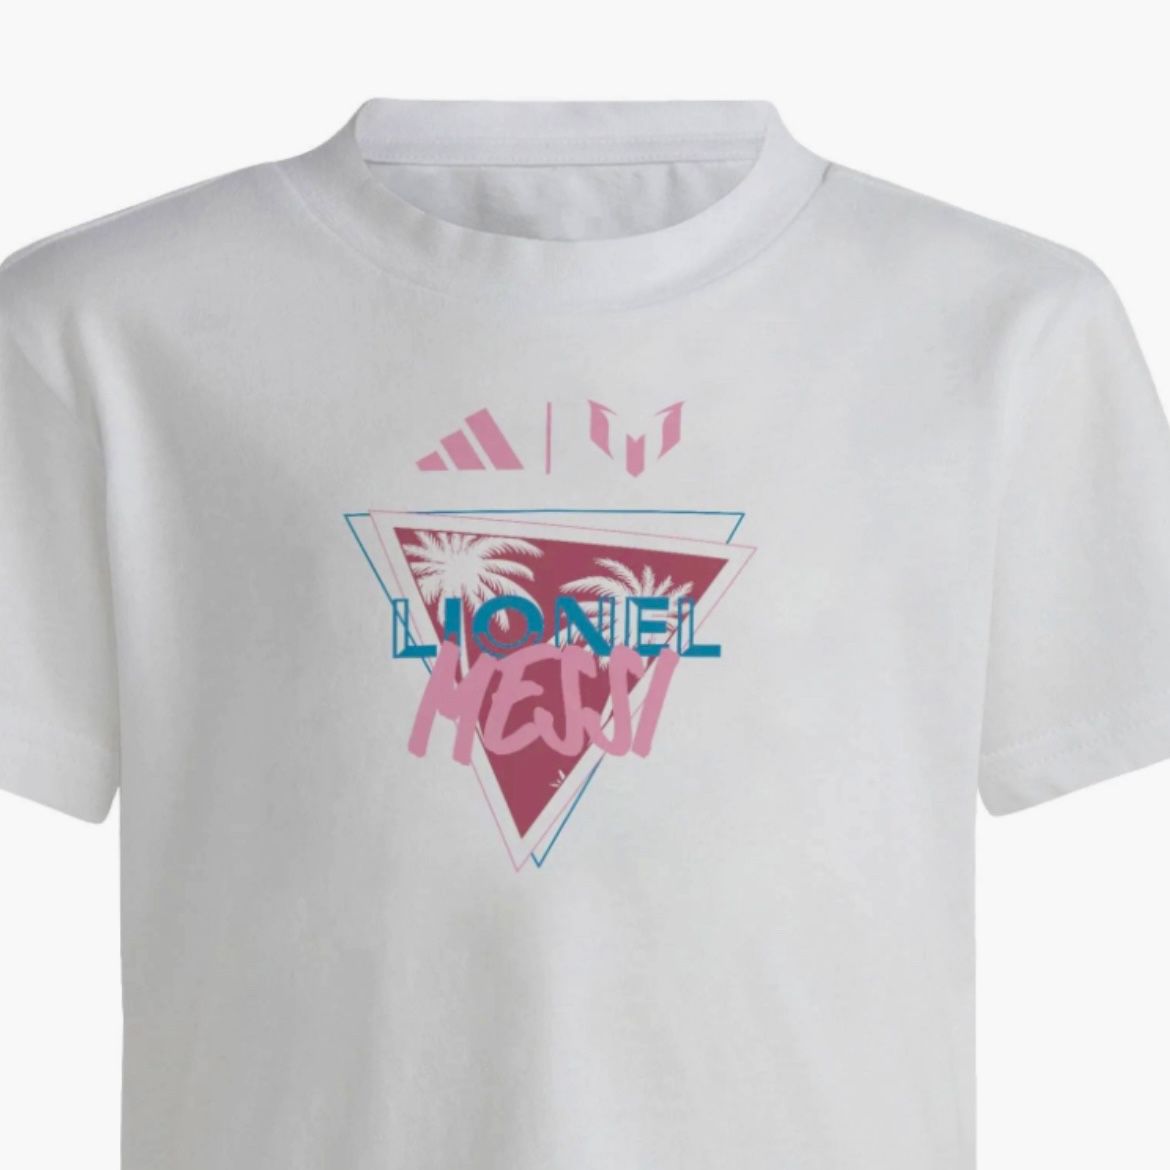 Sold Out on Adidas - Authentic Adidas x Lionel Messi x Inter Miami  CF T-Shirt Tee S M L XL Non-Jersey